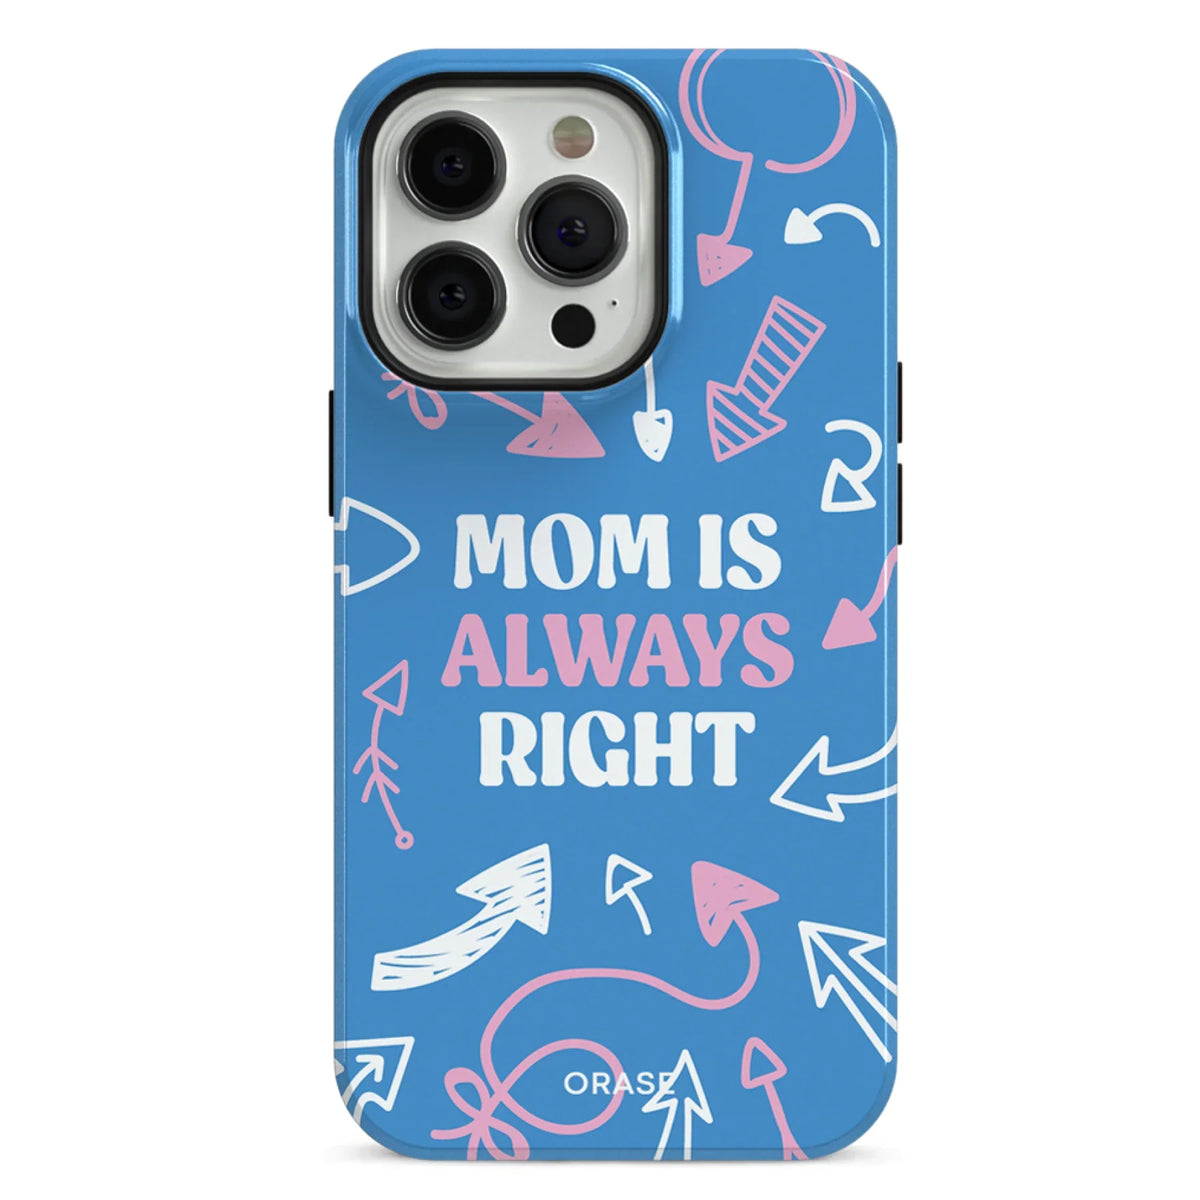 Mom Is Always Right iPhone Case - iPhone 13 Pro Max